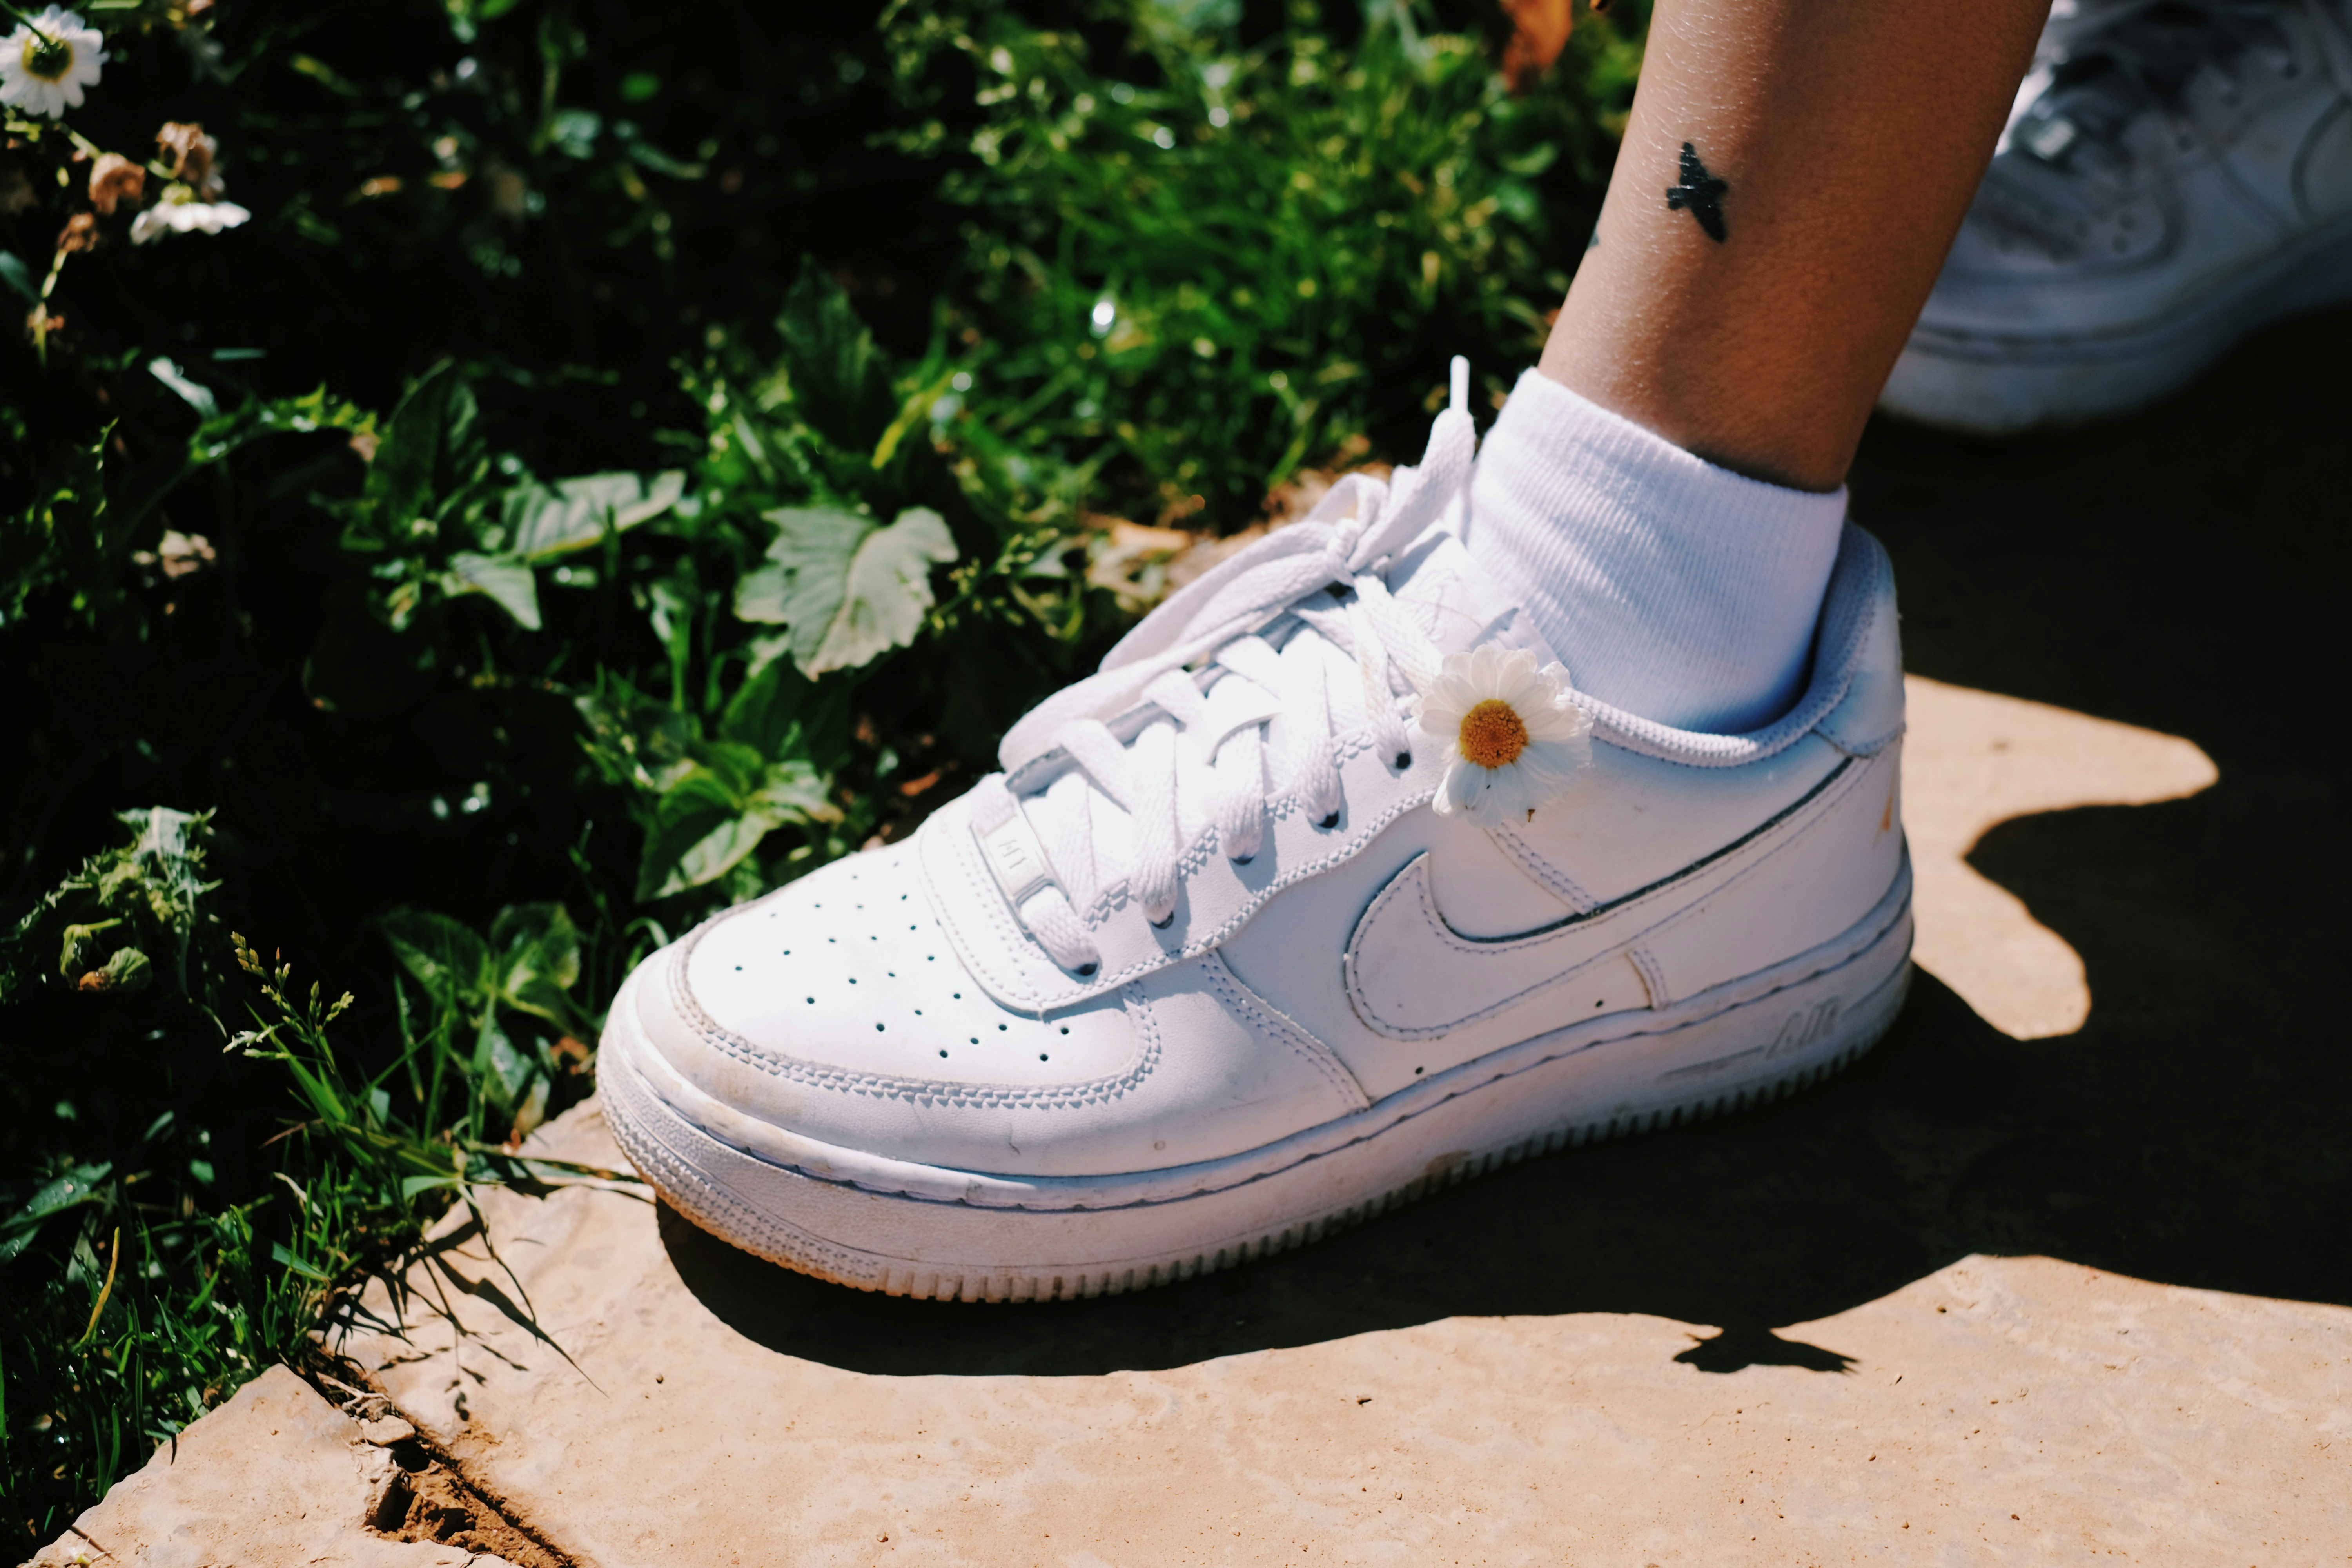 wearing air force 1